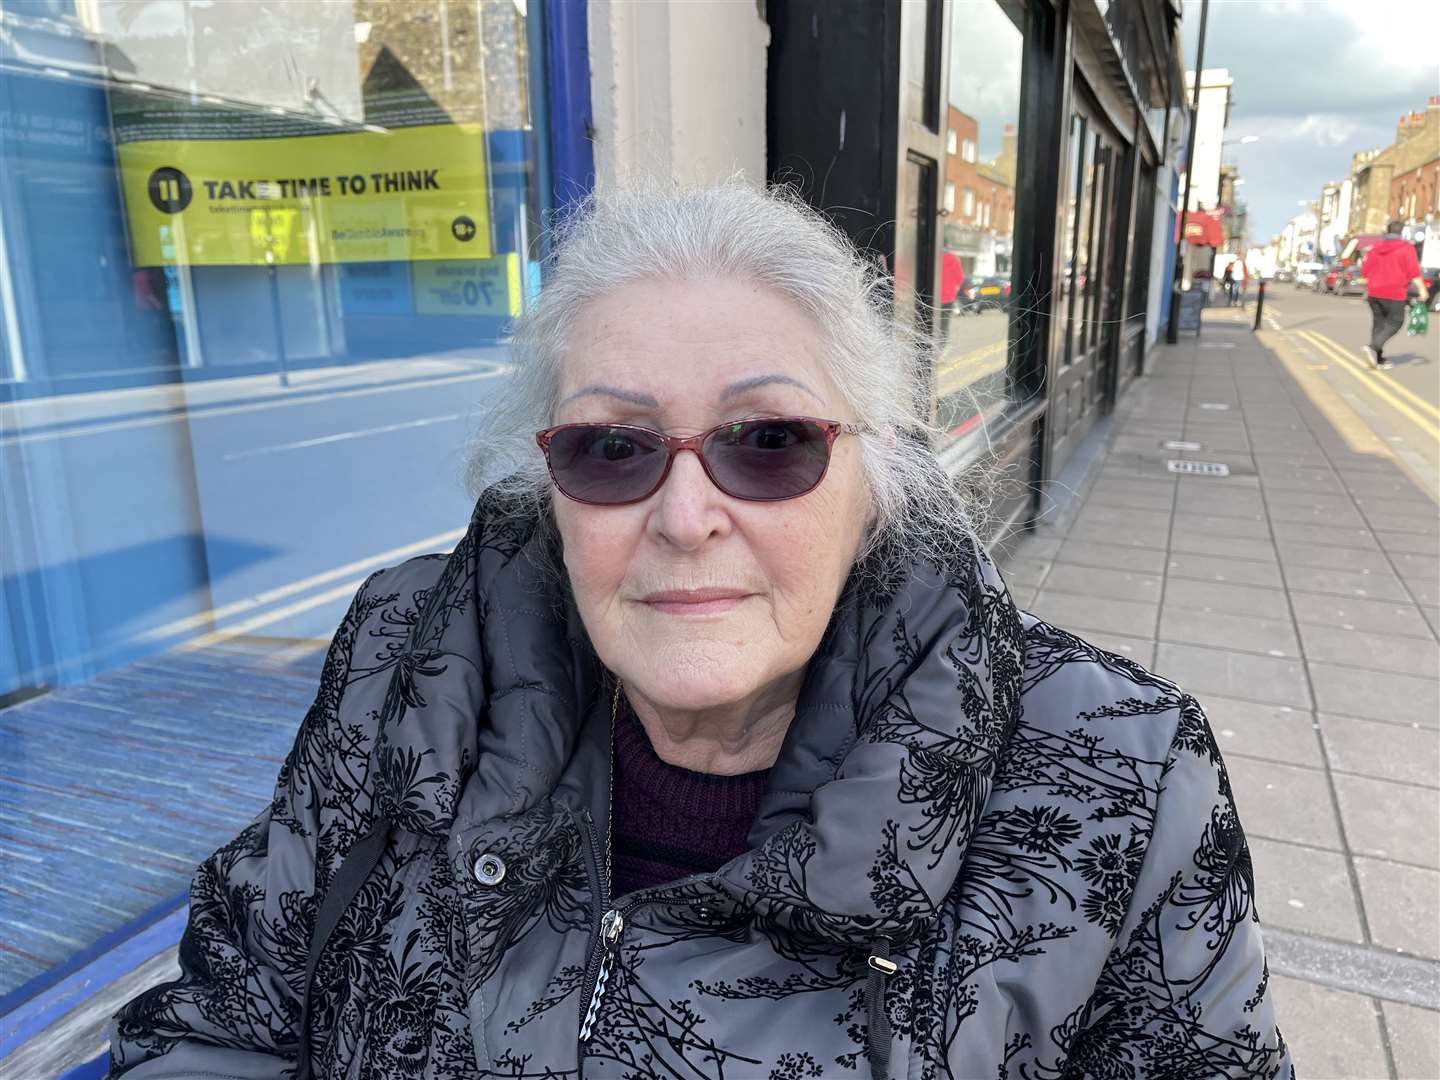 Susan Kingsland, 75, said Rooks' absence will make a difference in the town